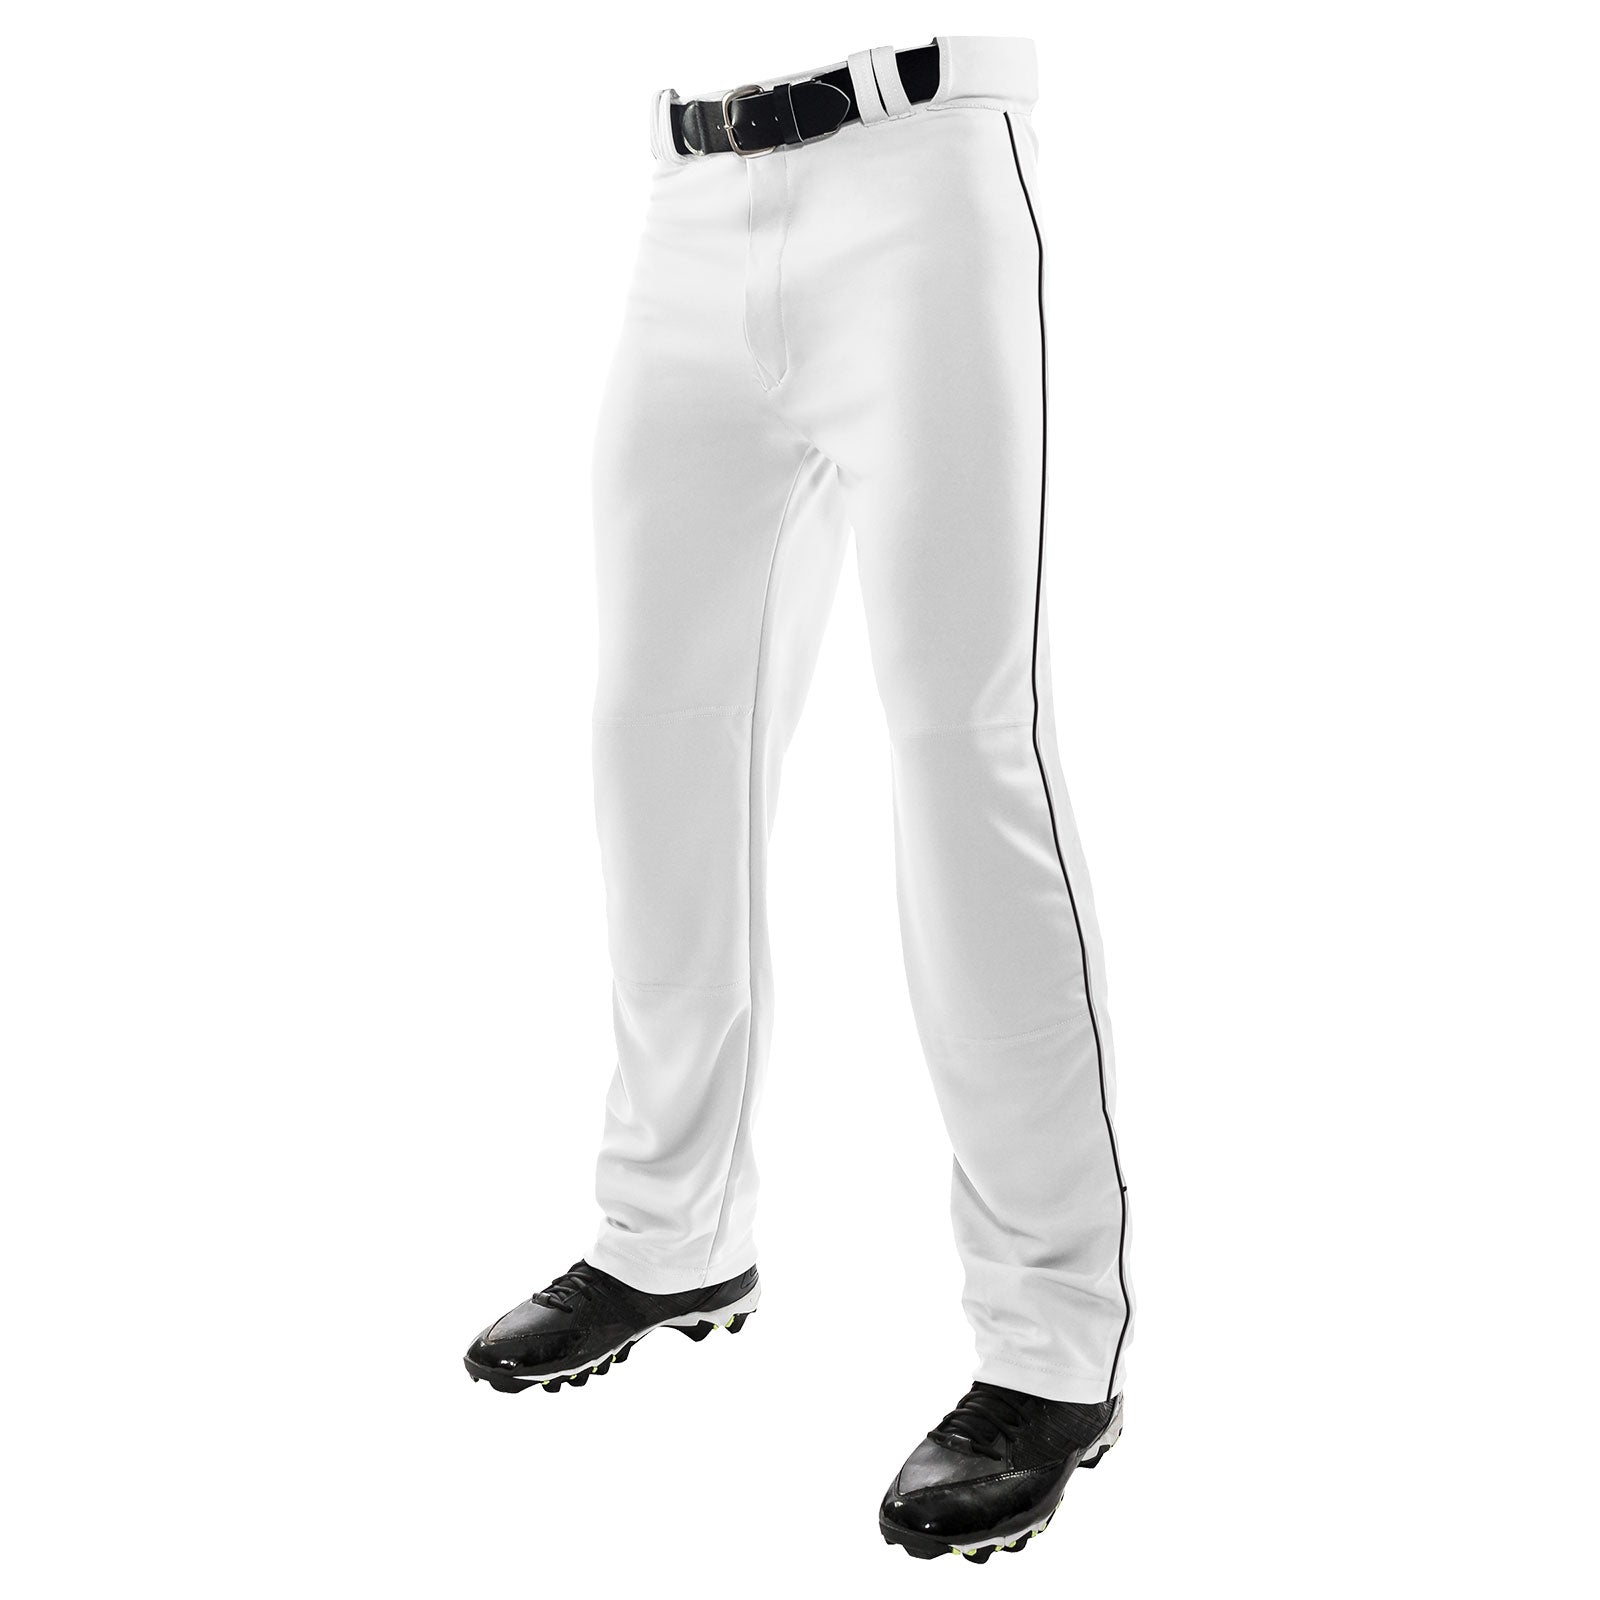 Alleson Youth Pinstripe Baseball Pants, Grey/ Red / L